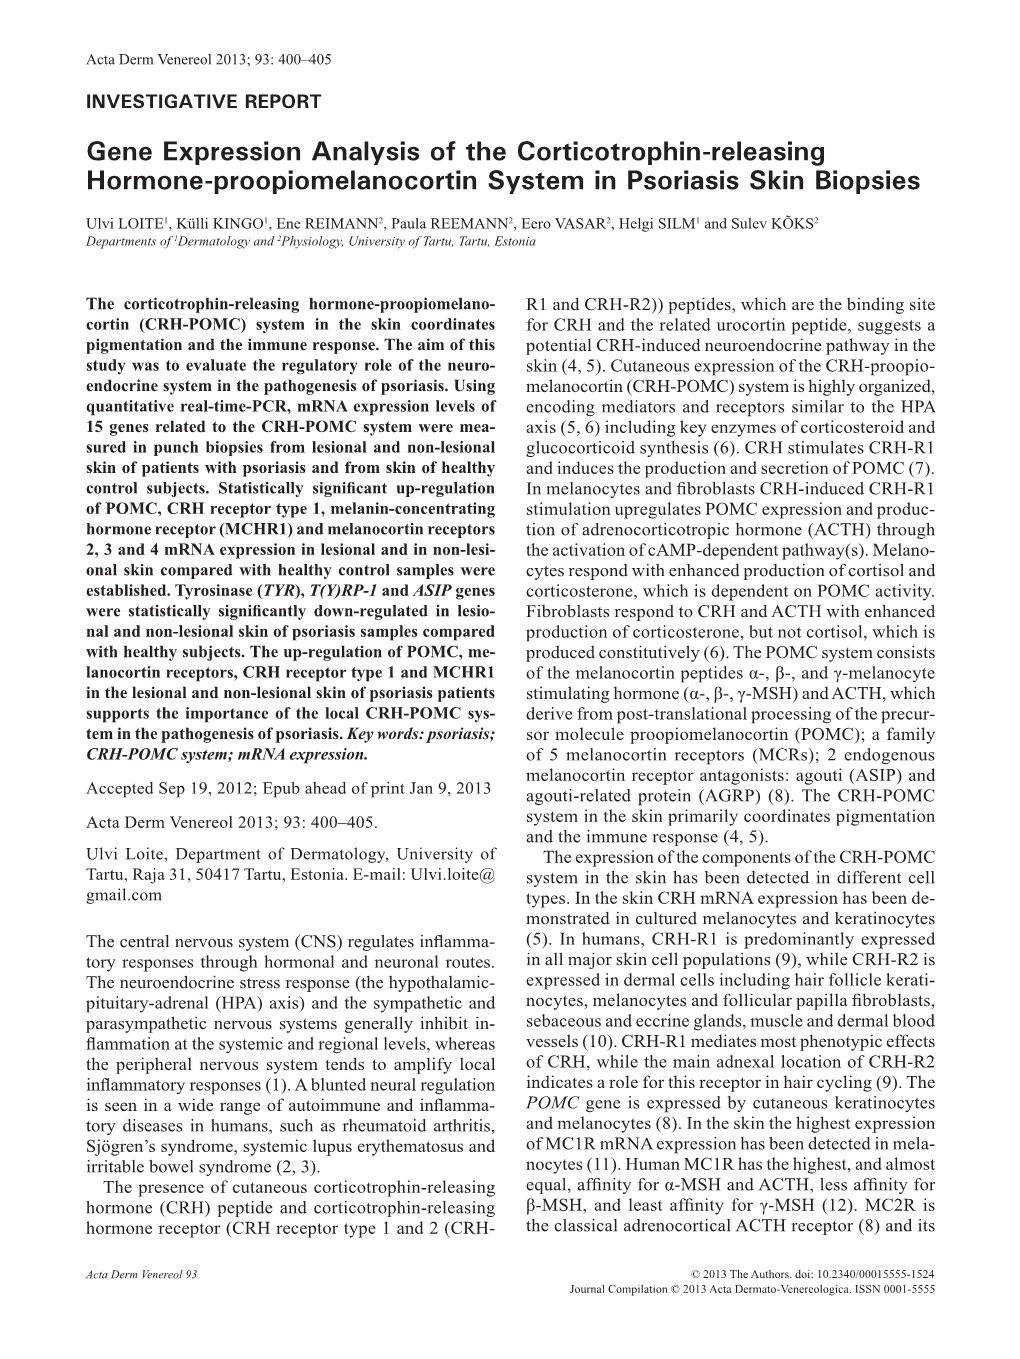 Gene Expression Analysis of the Corticotrophin-Releasing Hormone-Proopiomelanocortin System in Psoriasis Skin Biopsies